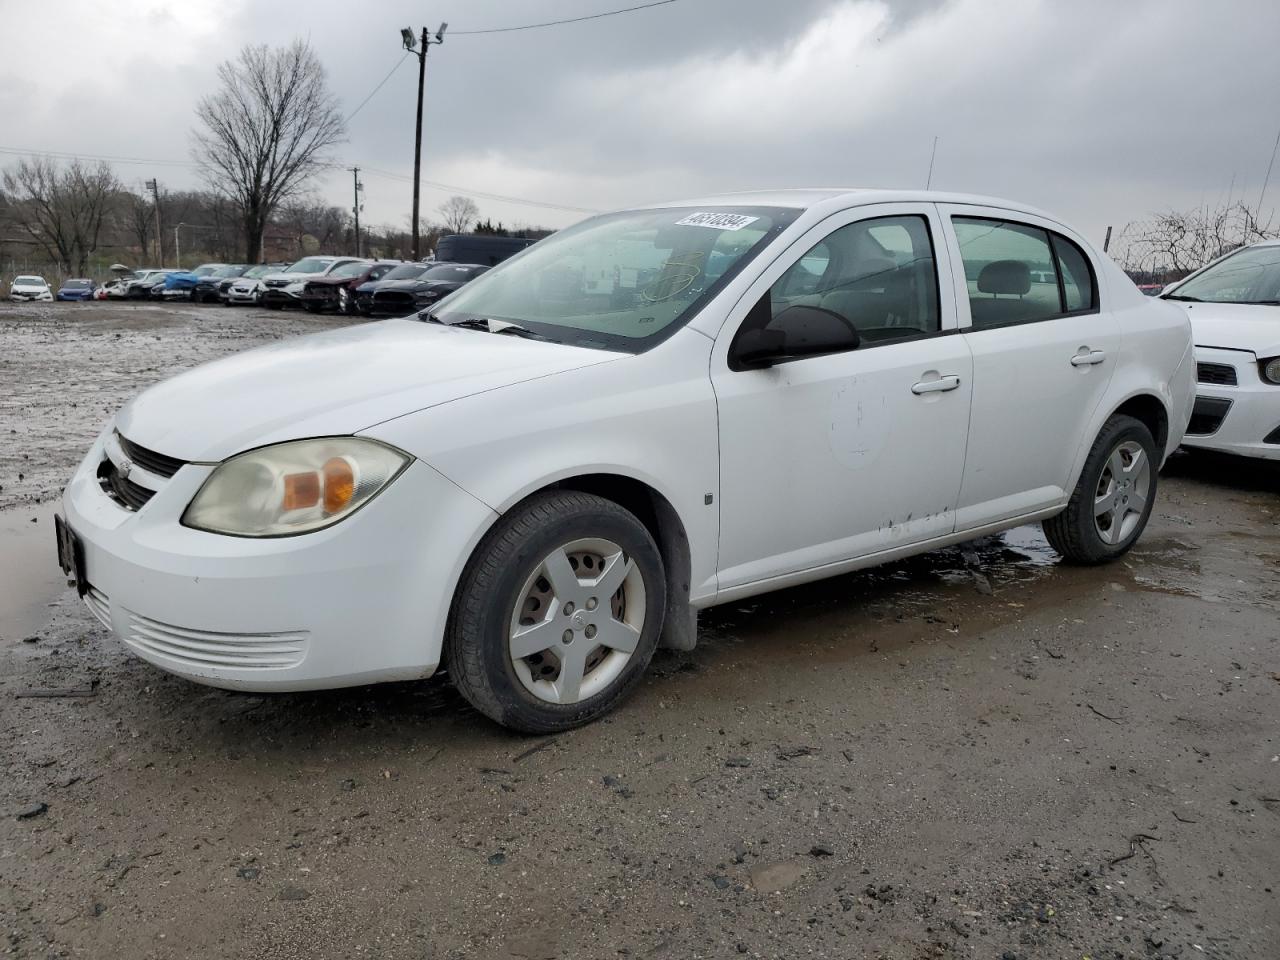 vin: 1G1AK55F867625554 1G1AK55F867625554 2006 chevrolet cobalt 2200 for Sale in 21225, Md - Baltimore East, Baltimore, USA